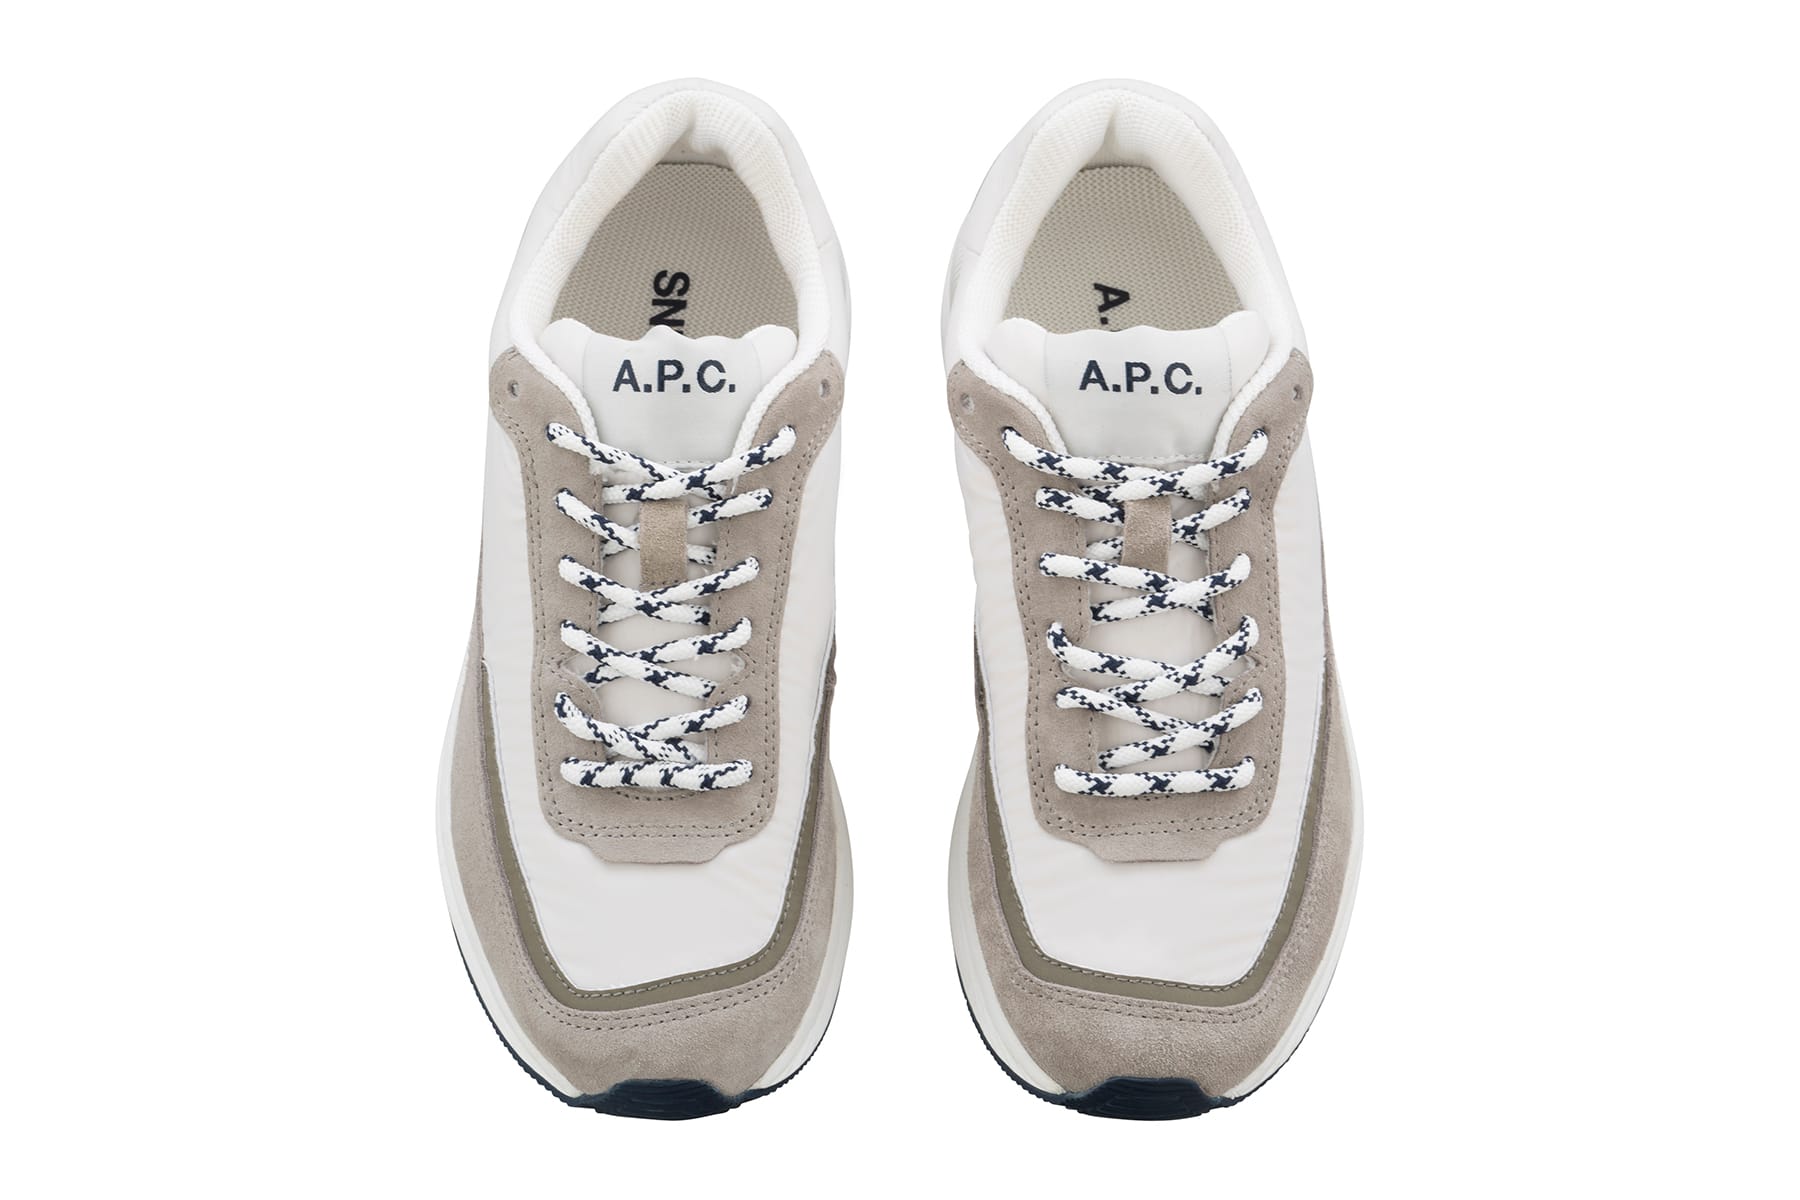 A.P.C.'s Minimalist Sneakers for Women 